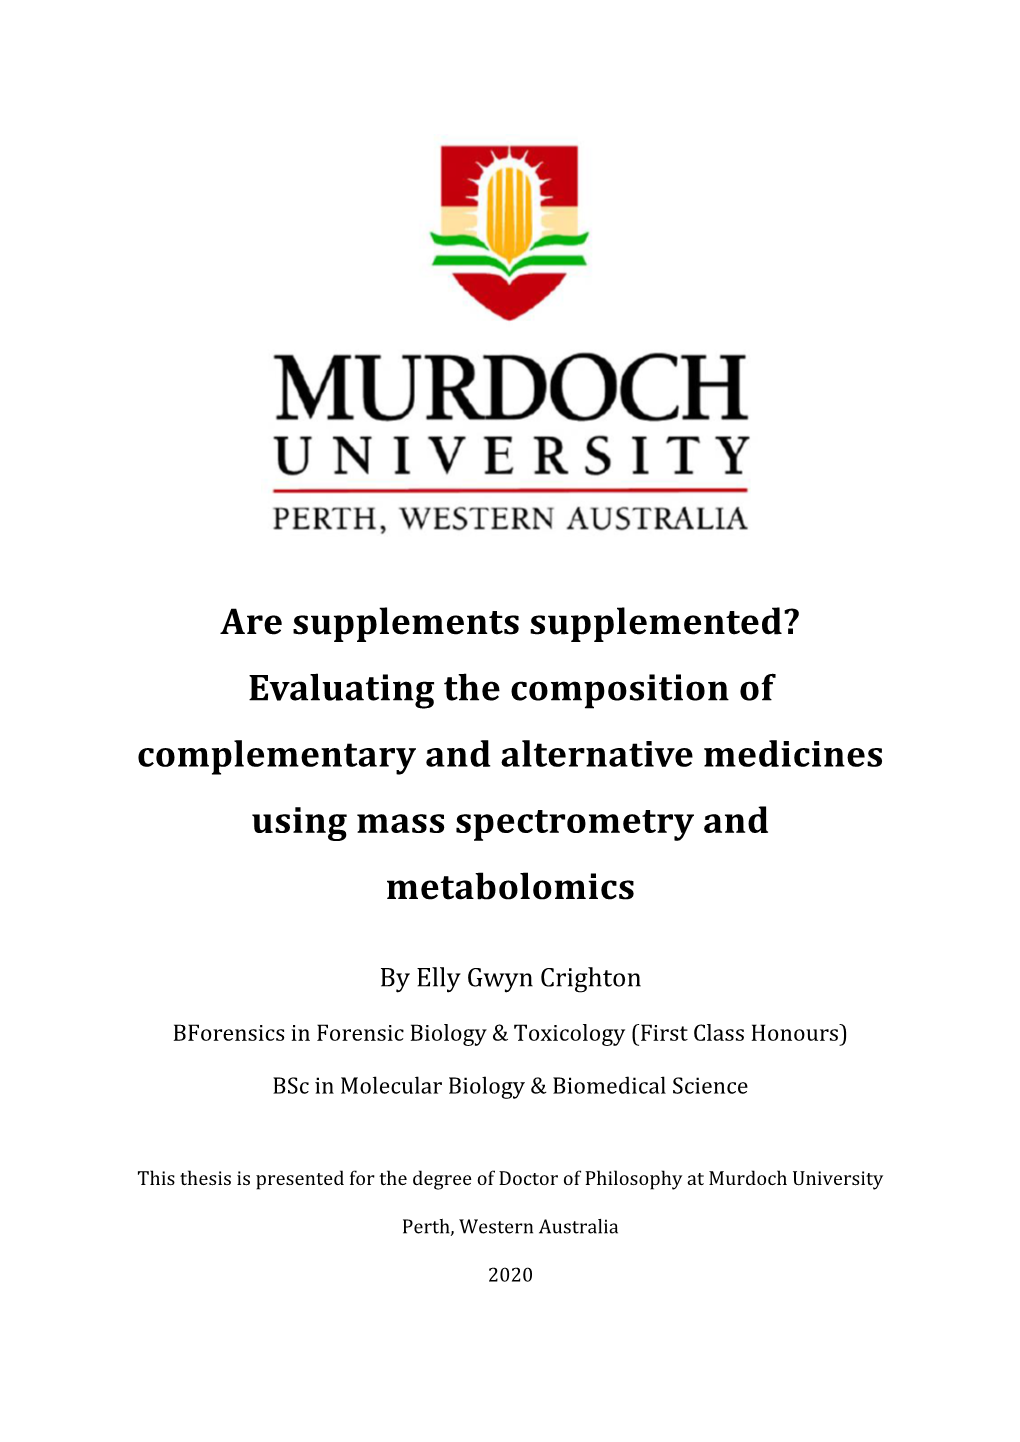 Are Supplements Supplemented? Evaluating the Composition of Complementary and Alternative Medicines Using Mass Spectrometry and Metabolomics